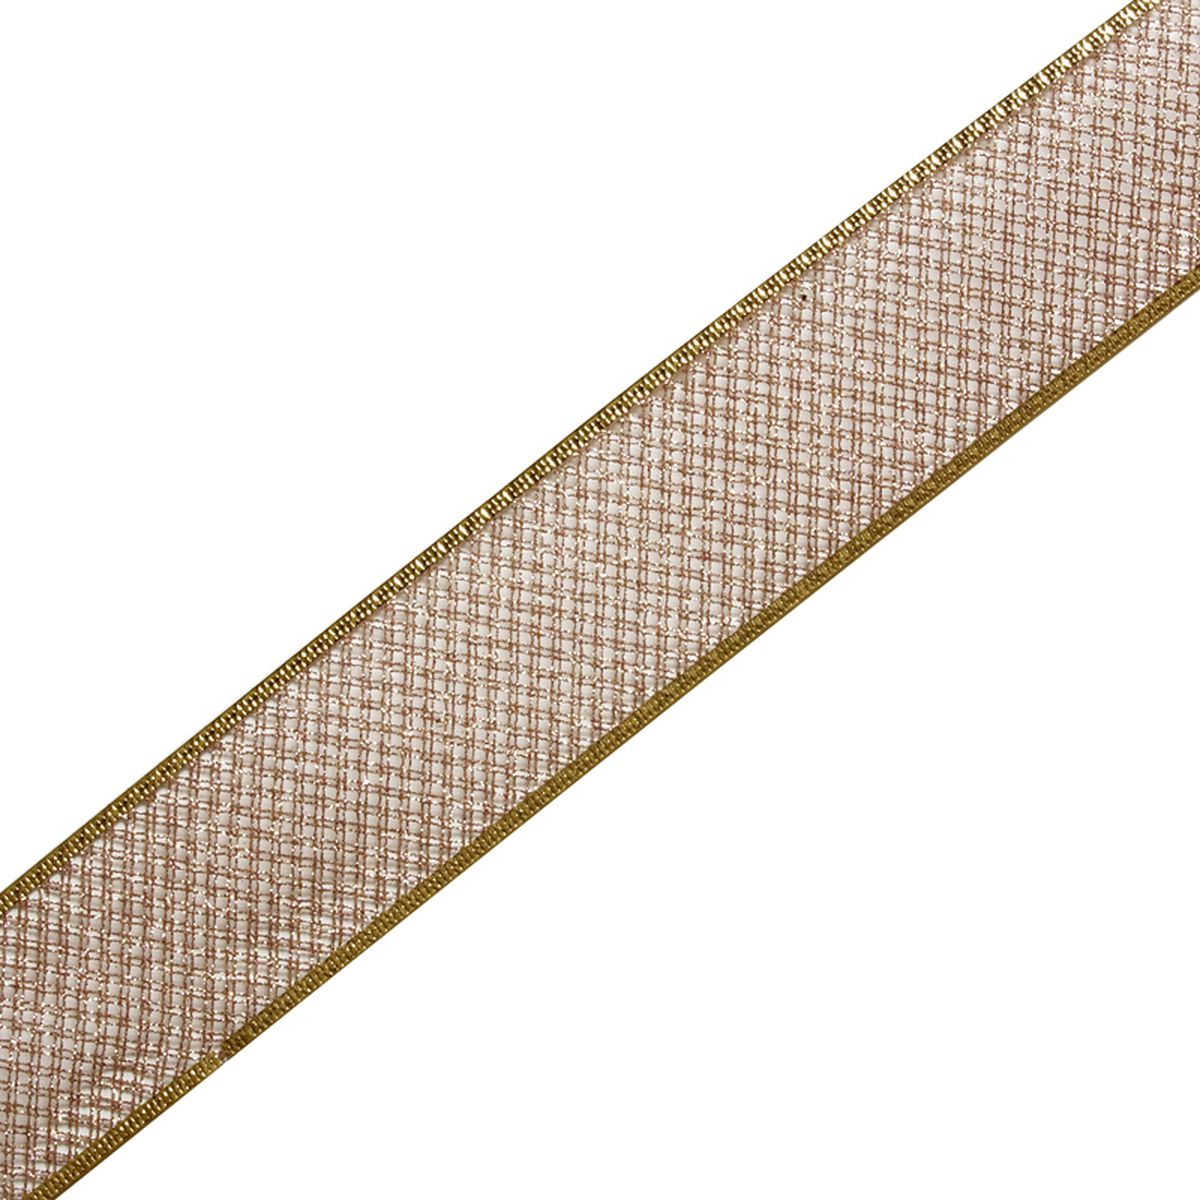 Picture of Mr. MJs VL-R-A2821 2.5 in. x 10 Yards Copper Colored Mesh Ribbon